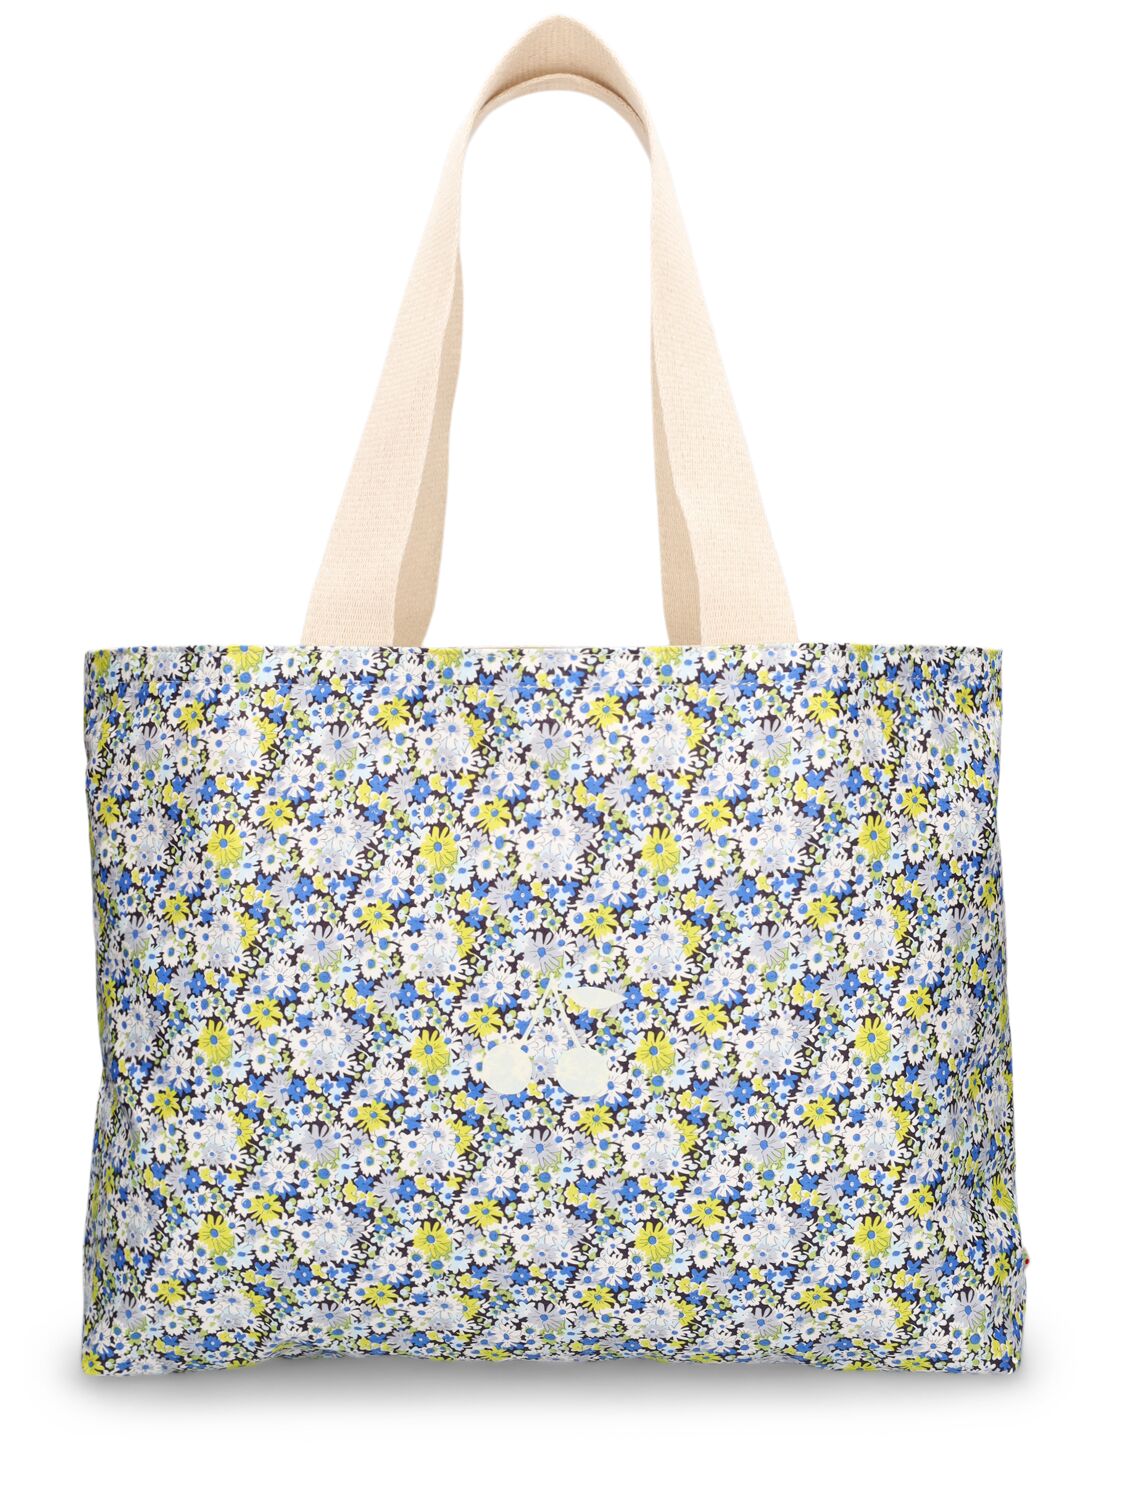 Image of Printed Coated Cotton Tote Bag